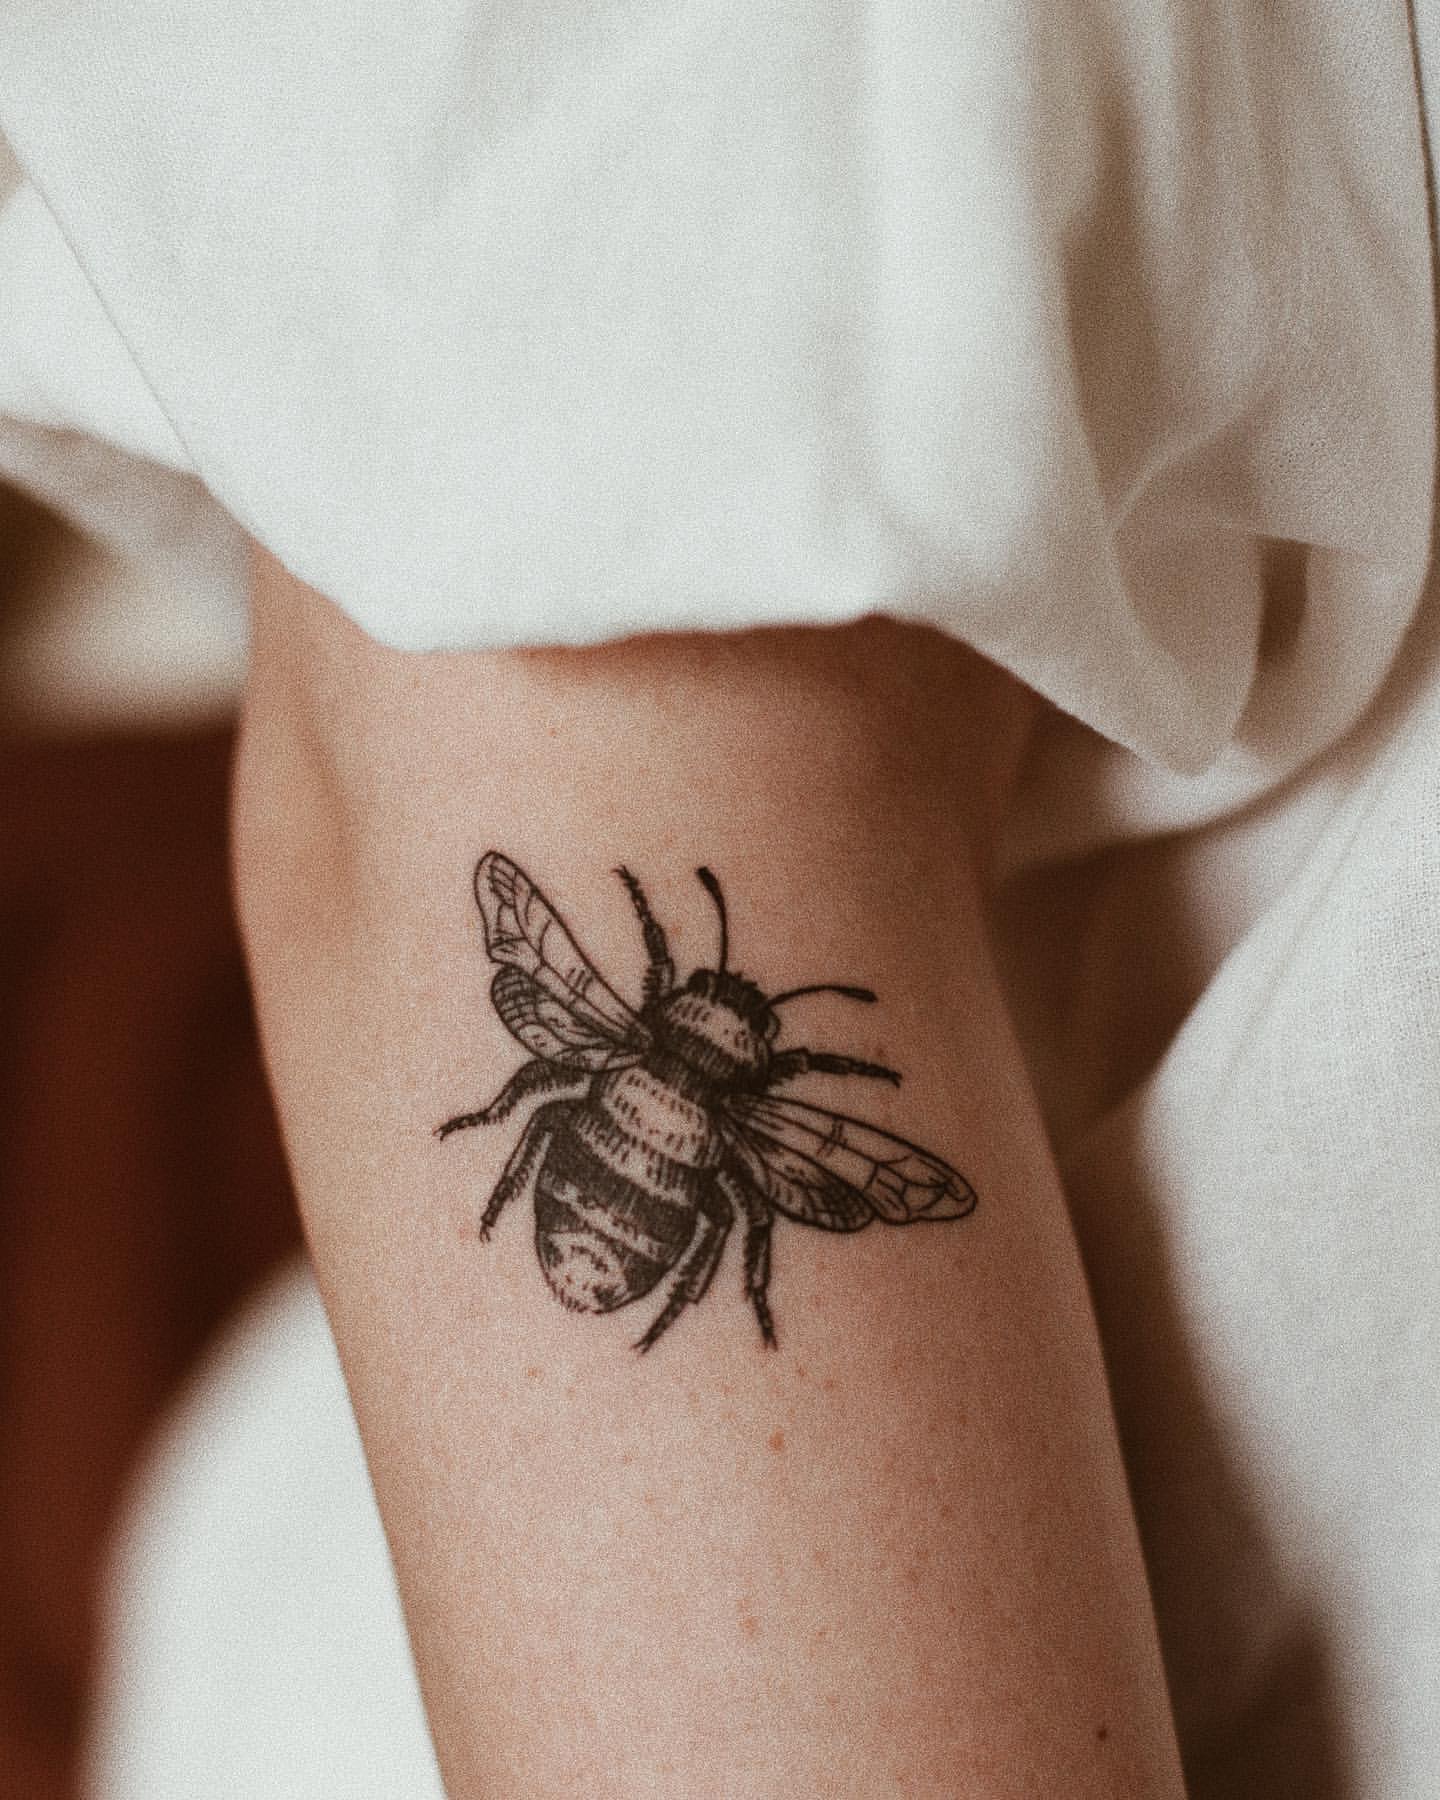 10+ Vintage Bee Tattoo Ideas That Will Blow Your Mind! - alexie